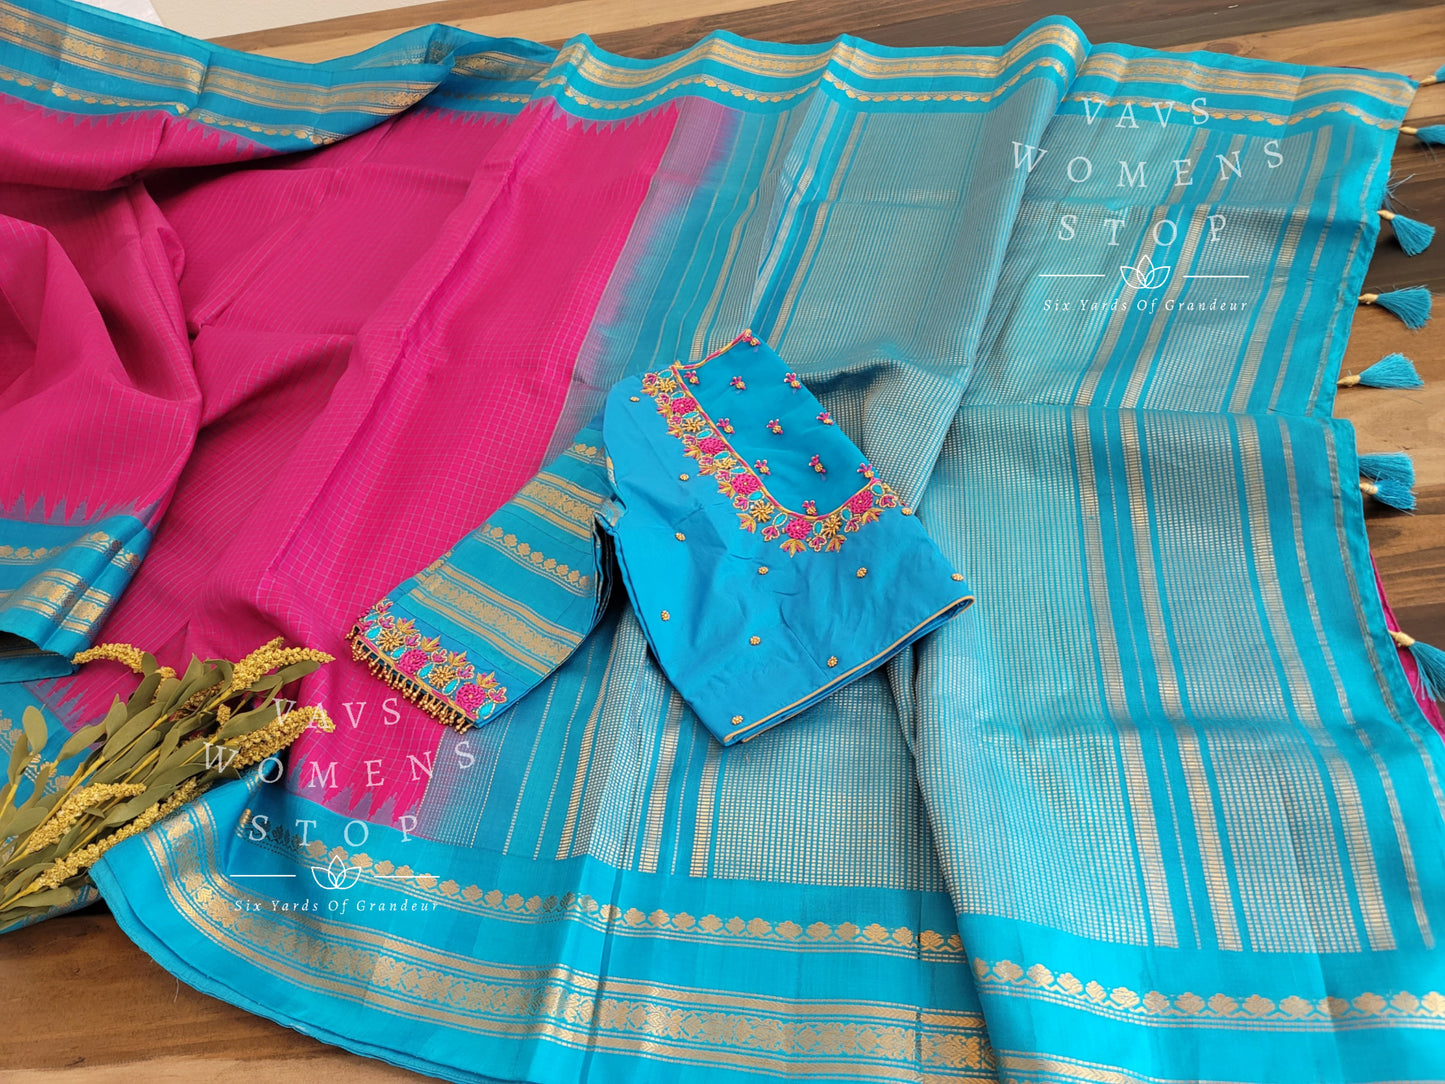 Pure Gadwal Silk saree - Hand Embroidered Blouse